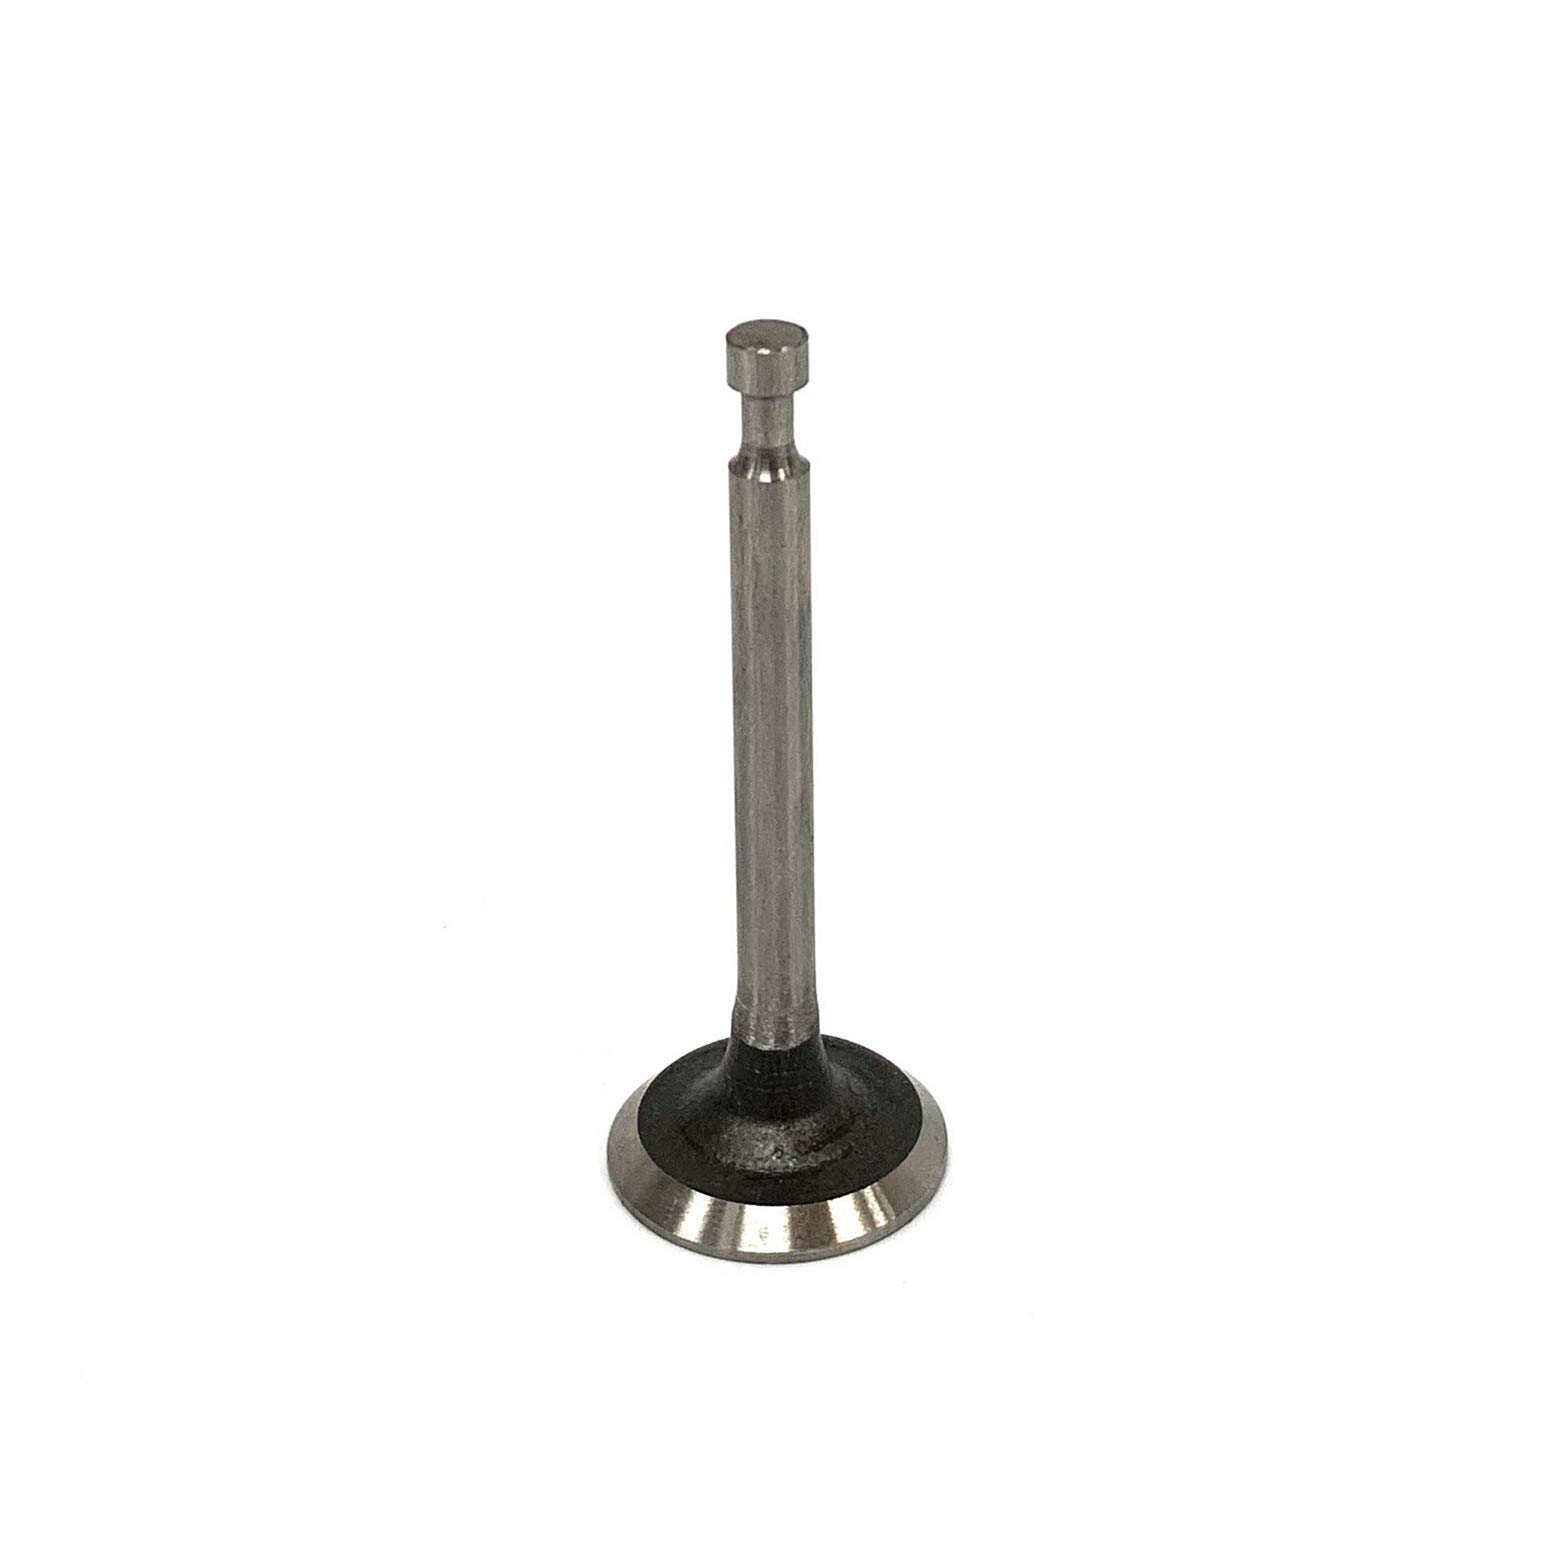 POWER PRODUCTS Inlet & Exhaust Valve for Predator Non-Hemi 6.5HP 212CC Gas Engine 60363 69730 69727